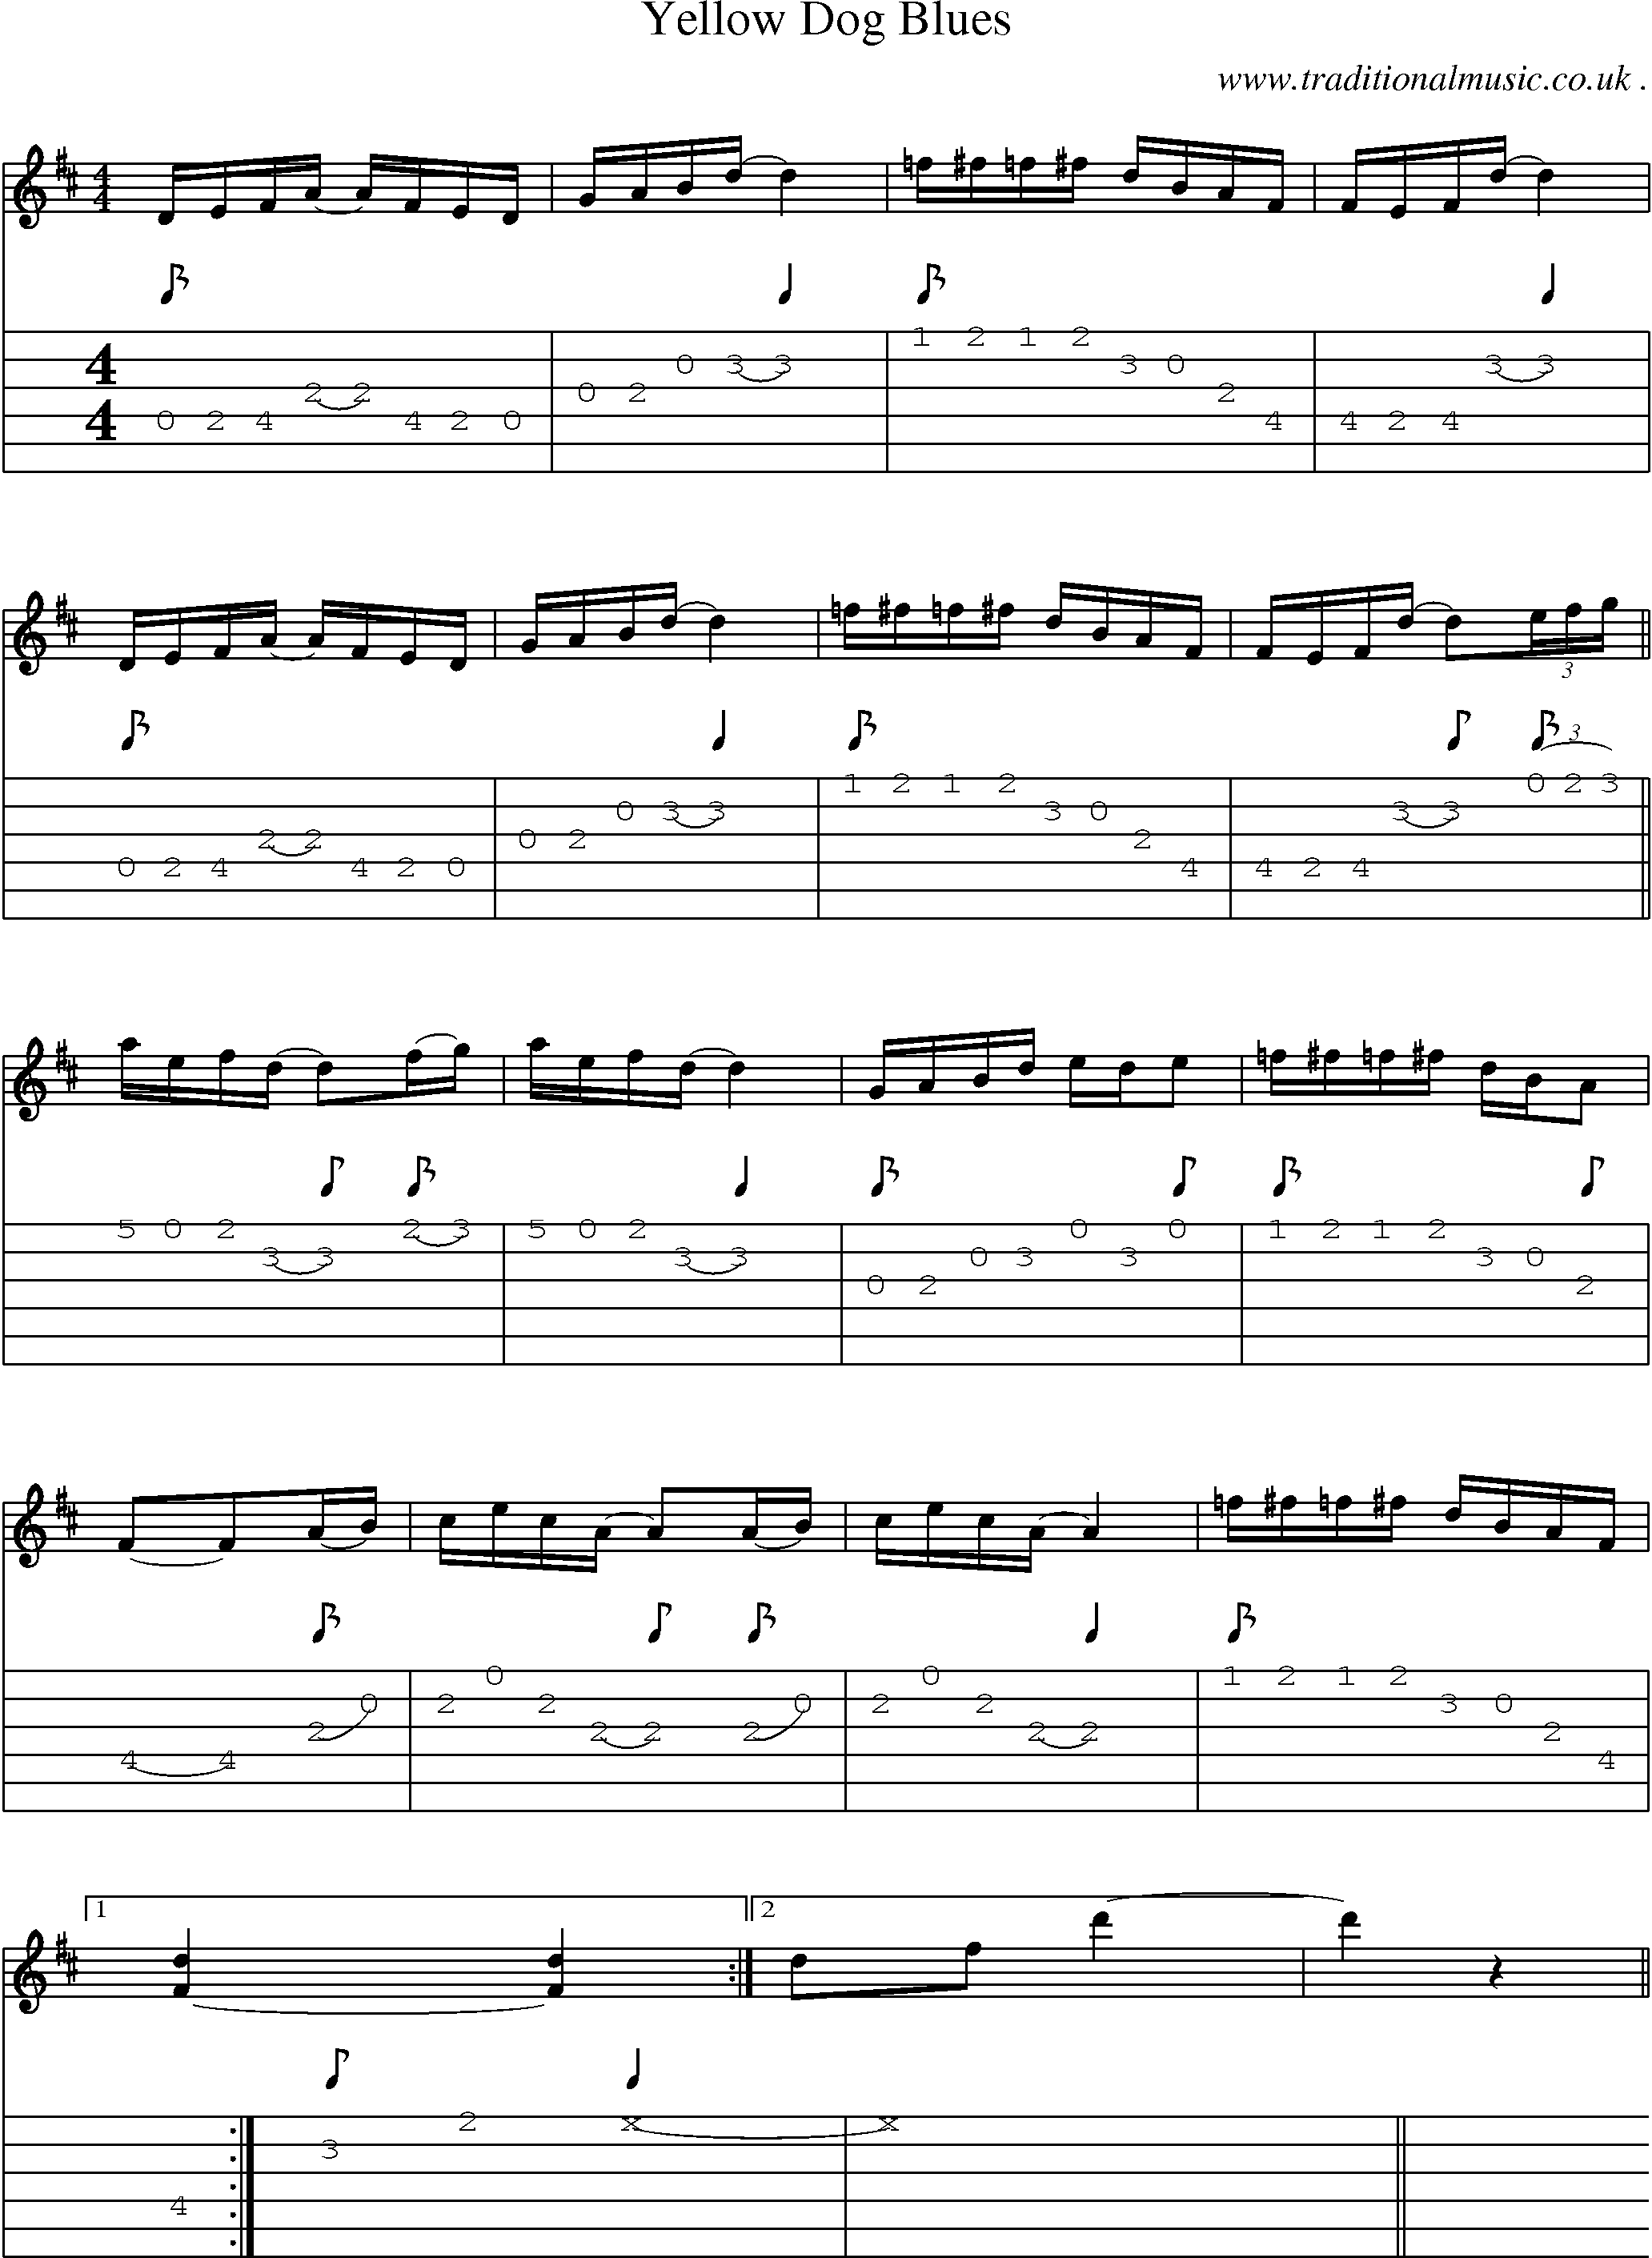 Music Score and Guitar Tabs for Yellow Dog Blues